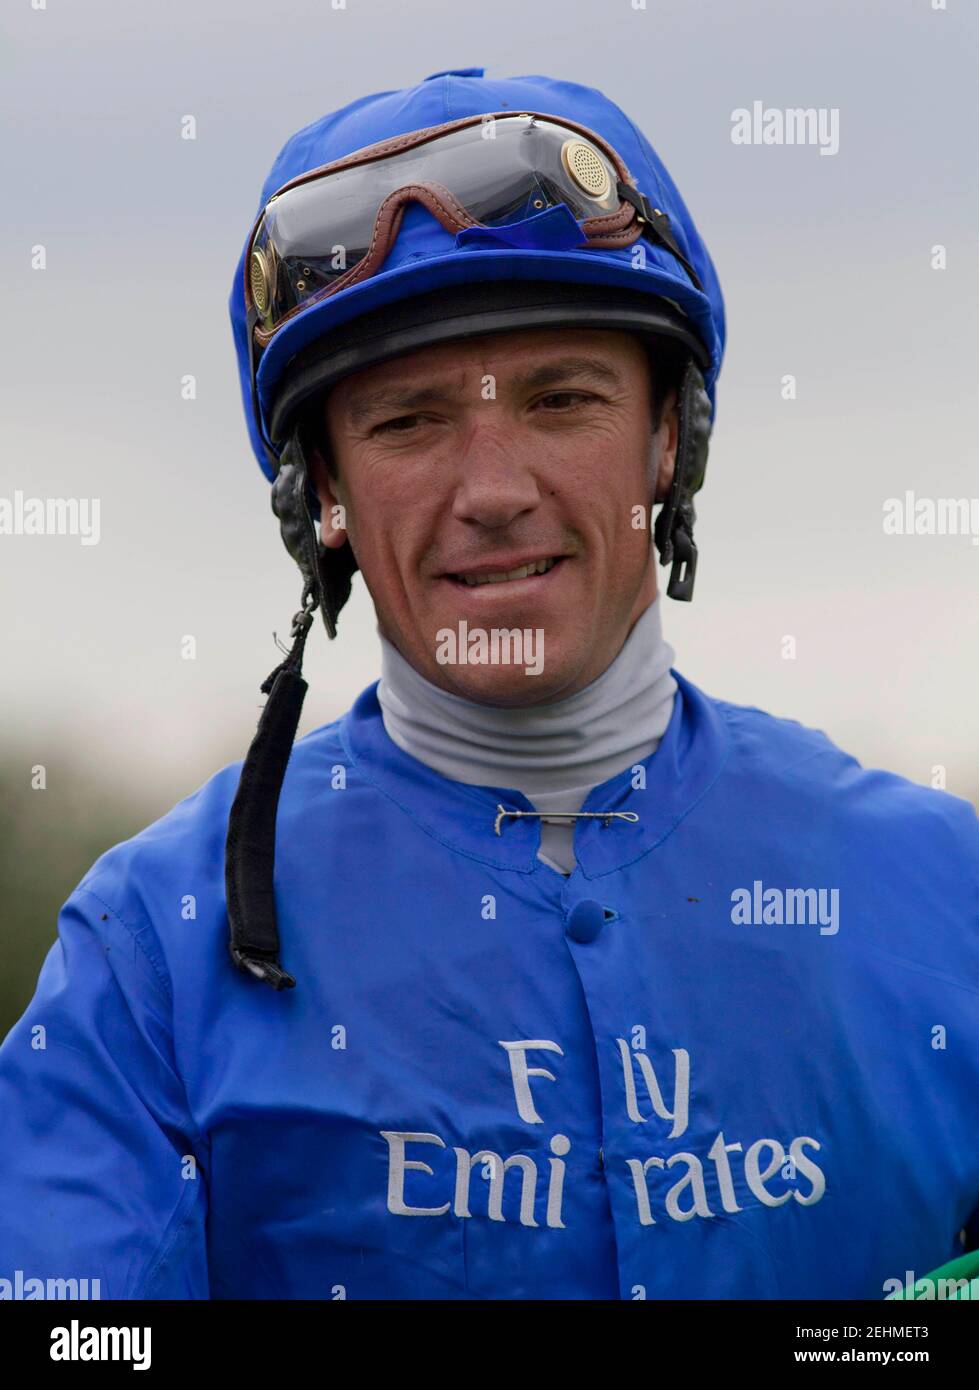 Horse Racing - Glorious Goodwood - Goodwood Racecourse - 26/7/11  Jockey Frankie Dettori after riding Delegator in the 15.10 The bet365 Lennox Stakes   Mandatory Credit: Action Images / Julian Herbert  Livepic Stock Photo